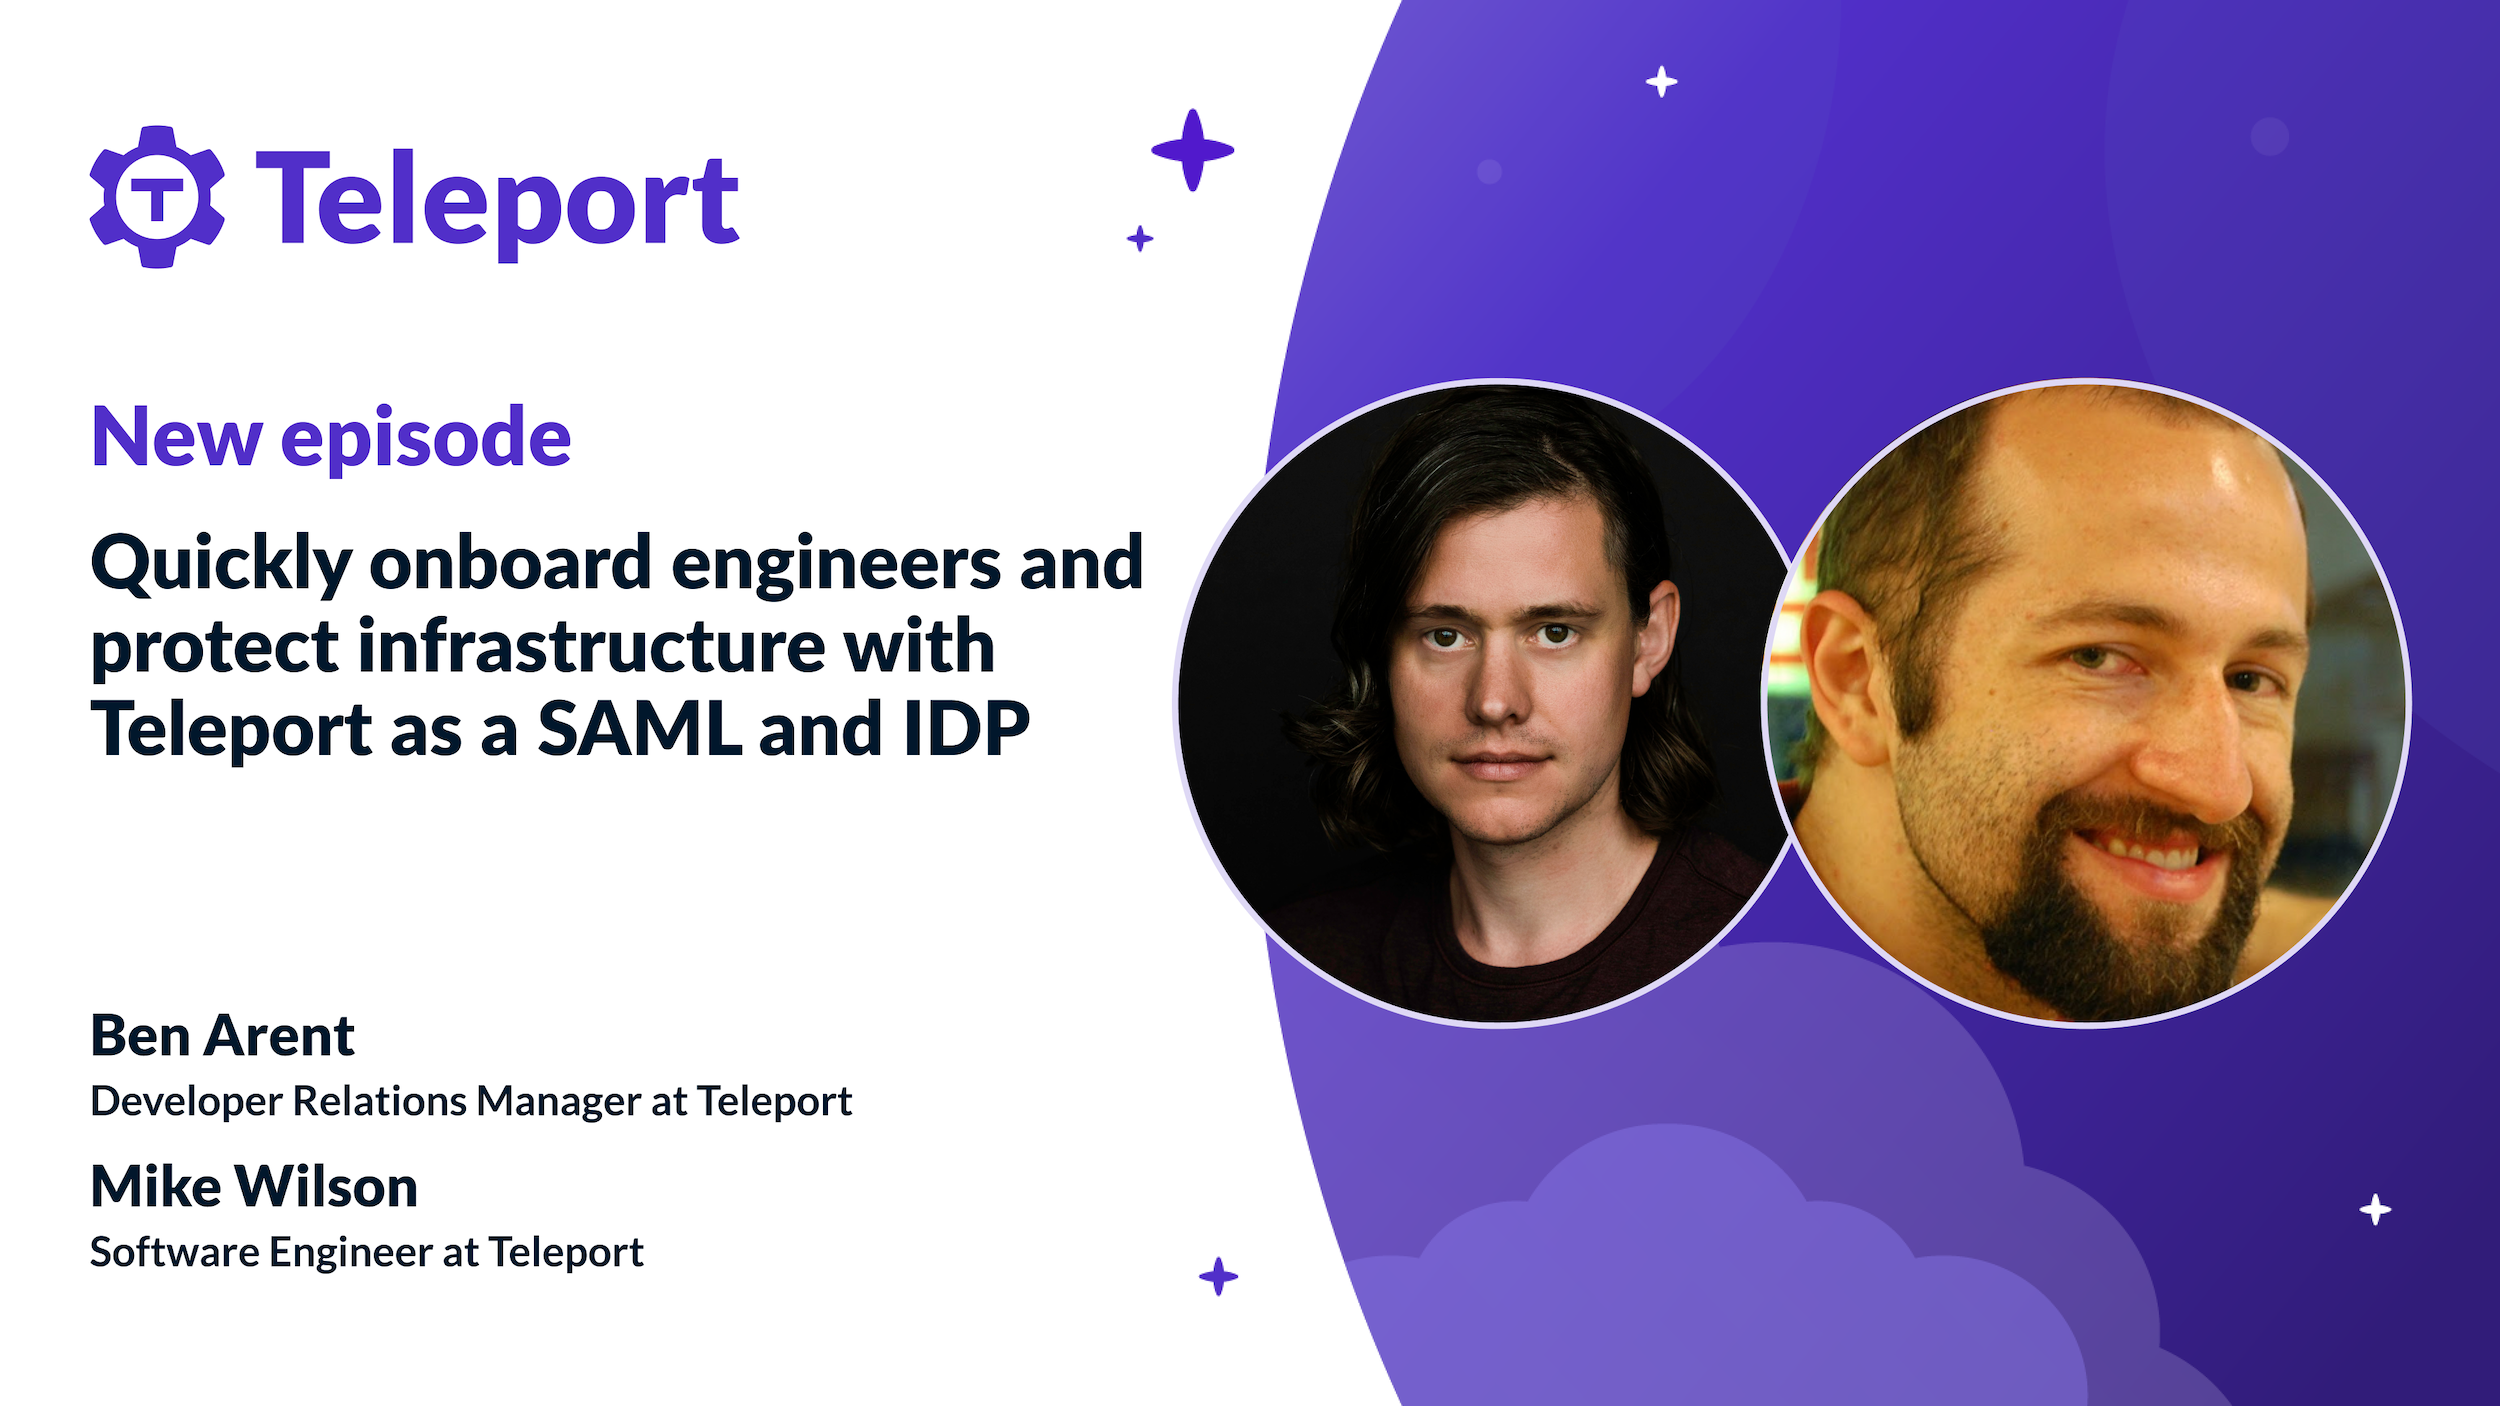 Quickly onboard engineers and protect infrastructure with Teleport